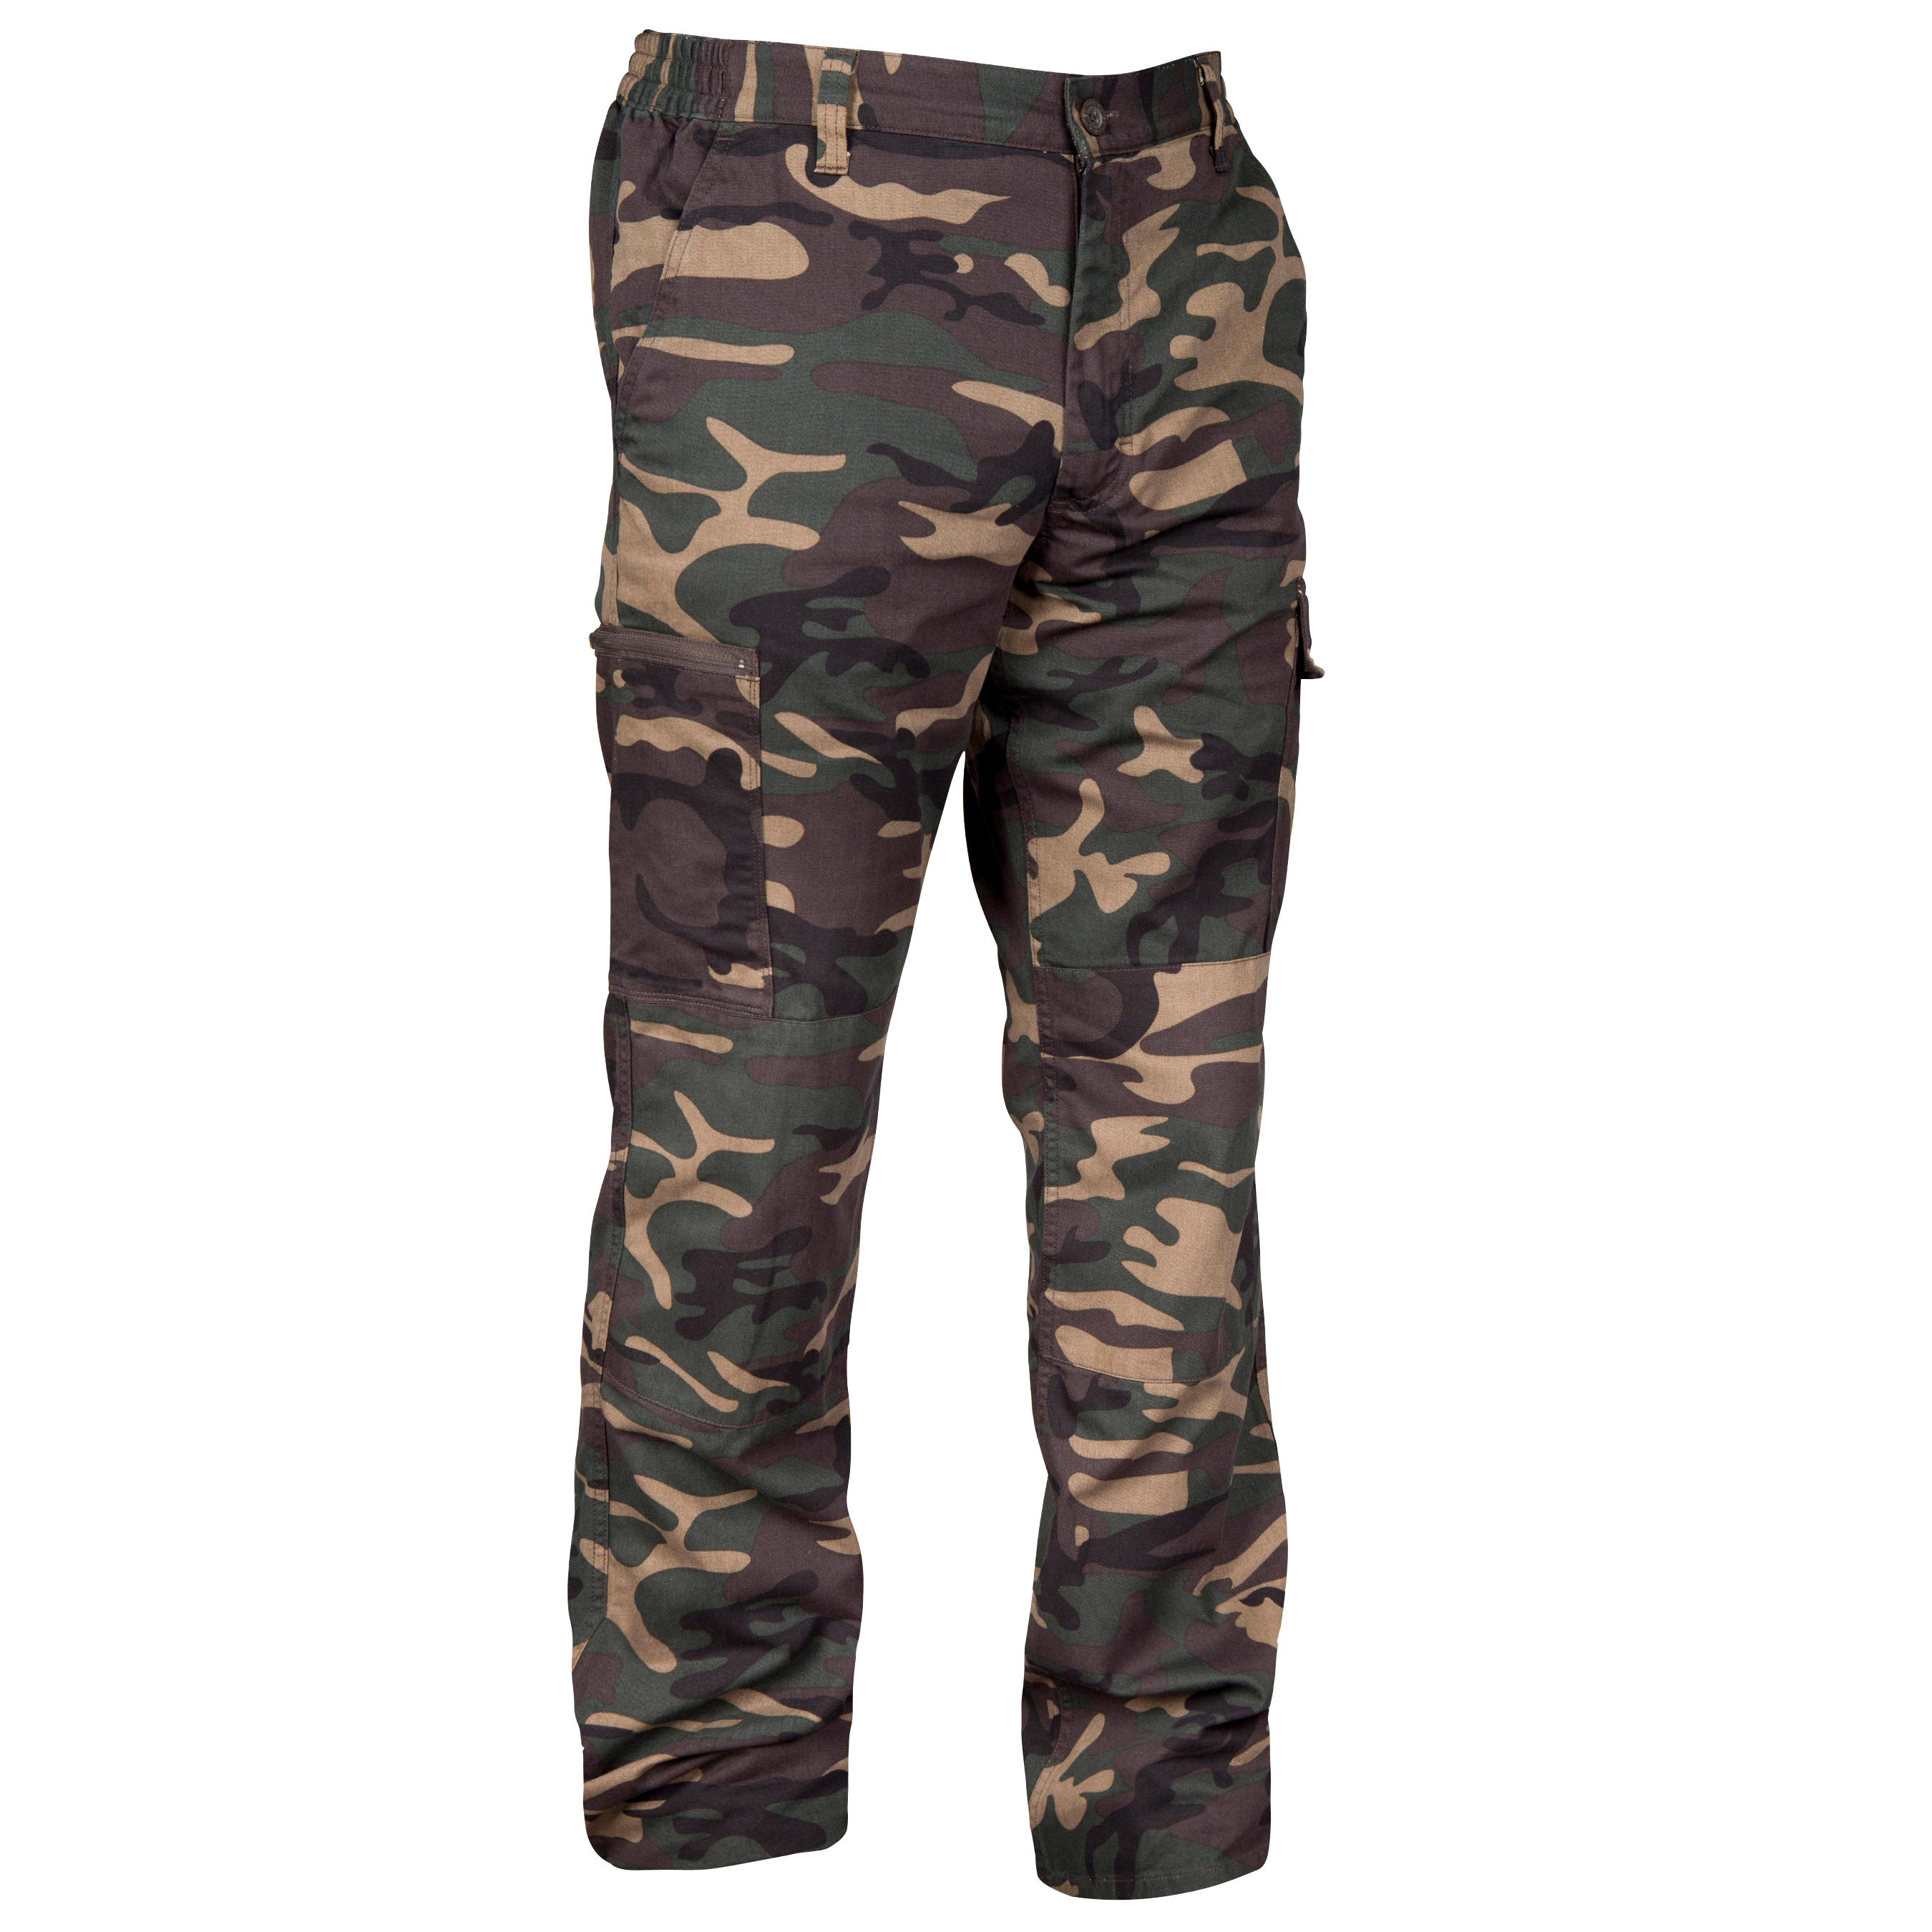 Shop for Camouflage Pants for Outdoor 